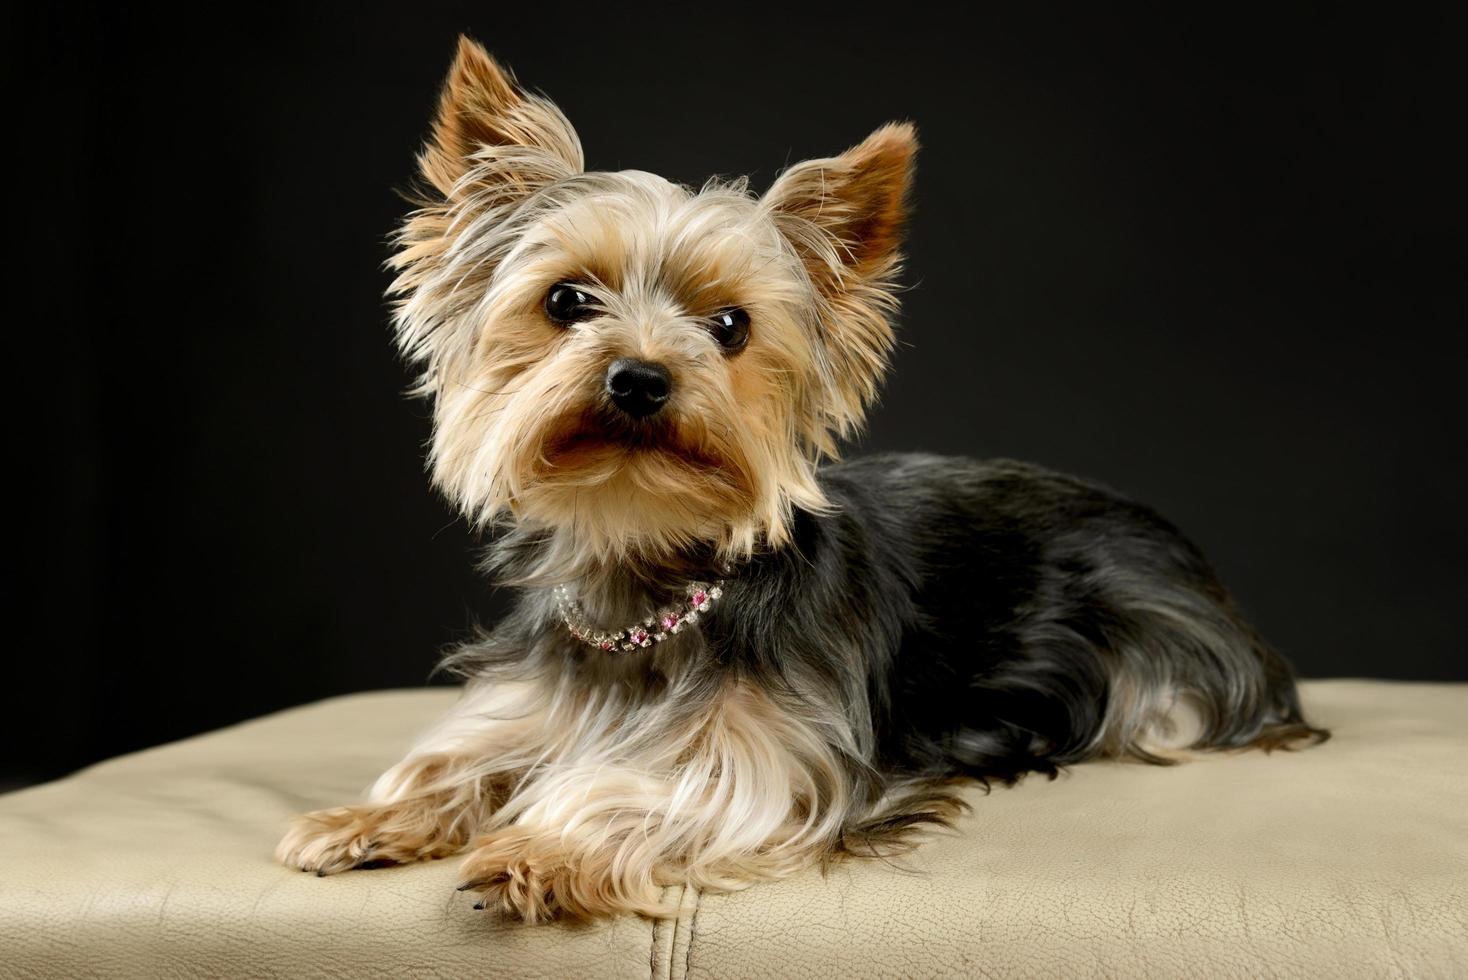 Yorkshire Terrier puppy posing on a black background photo